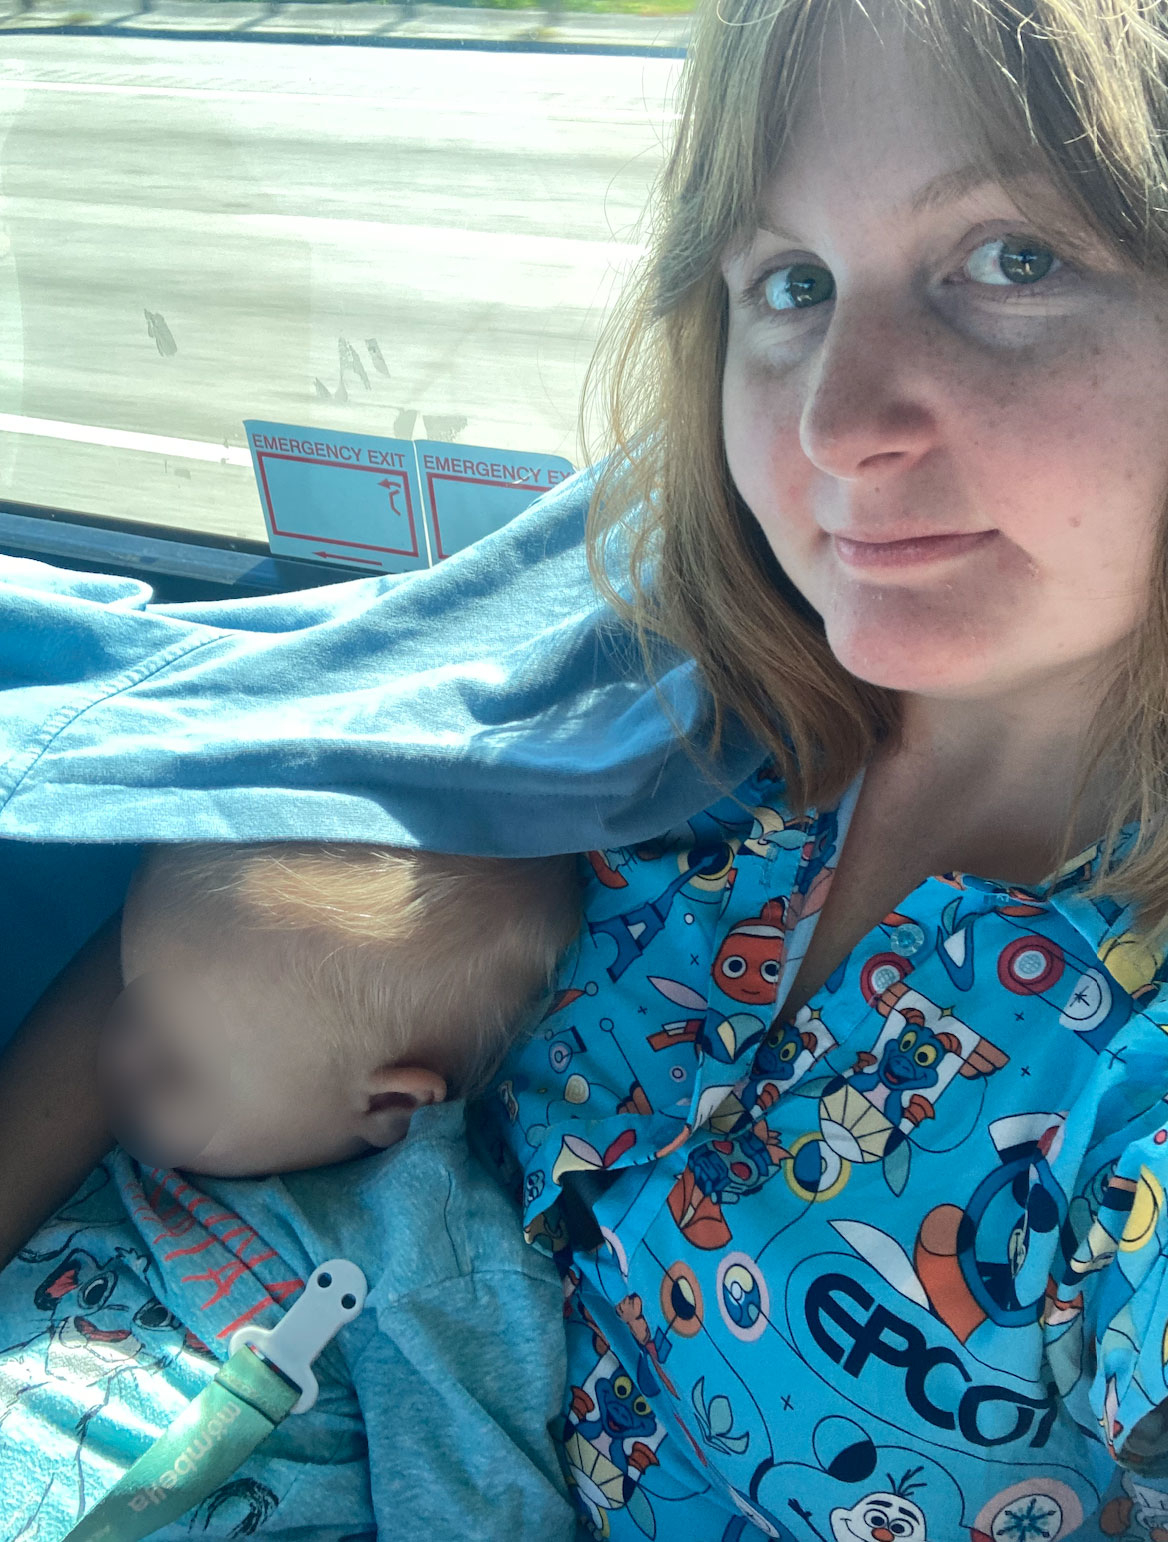 Woman in a blue shirt featuring Epcot and Disney characters sits on a bus with a child sleeping on her lap